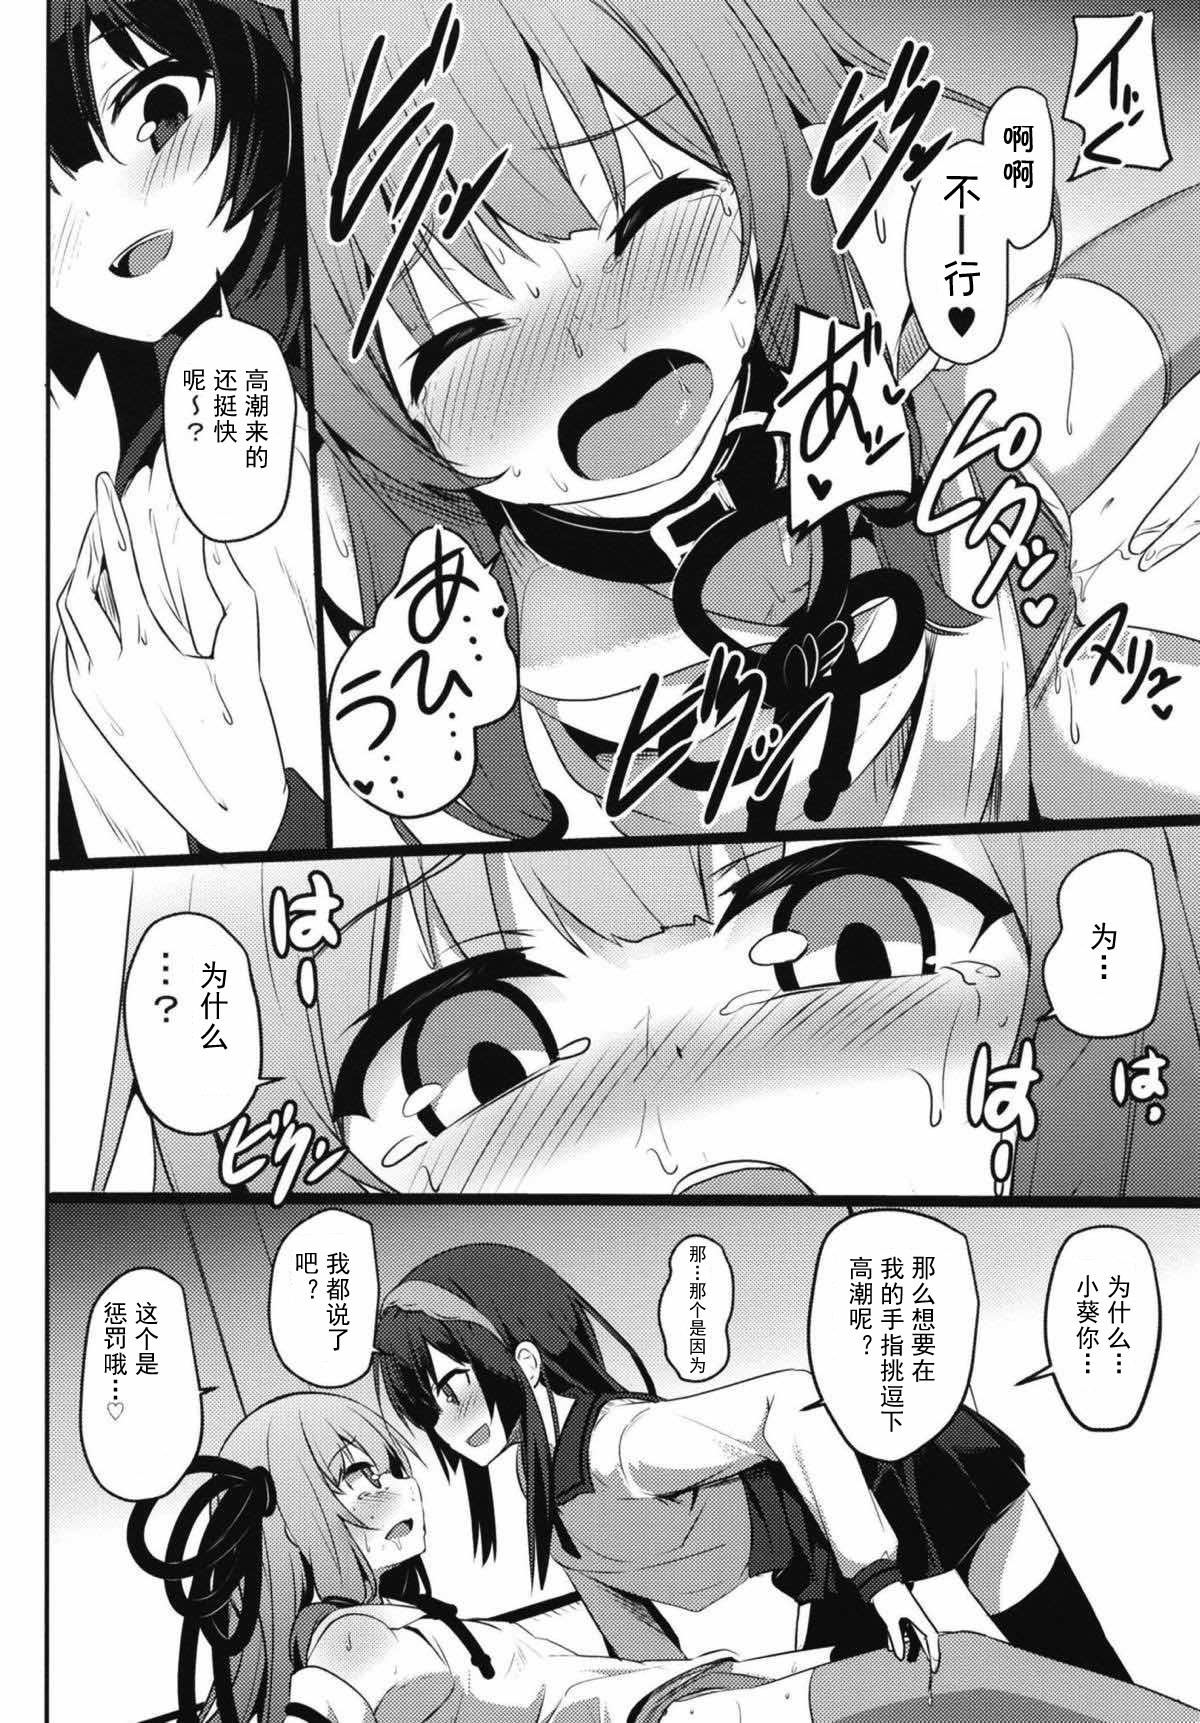 Ffm (Kotonoha's Festa 2) [Milk Pudding (Jamcy)] Akane-chan Challenge! 2.5-kaime (VOICEROID) [Chinese] [古早个人汉化] - Voiceroid Hung - Page 10